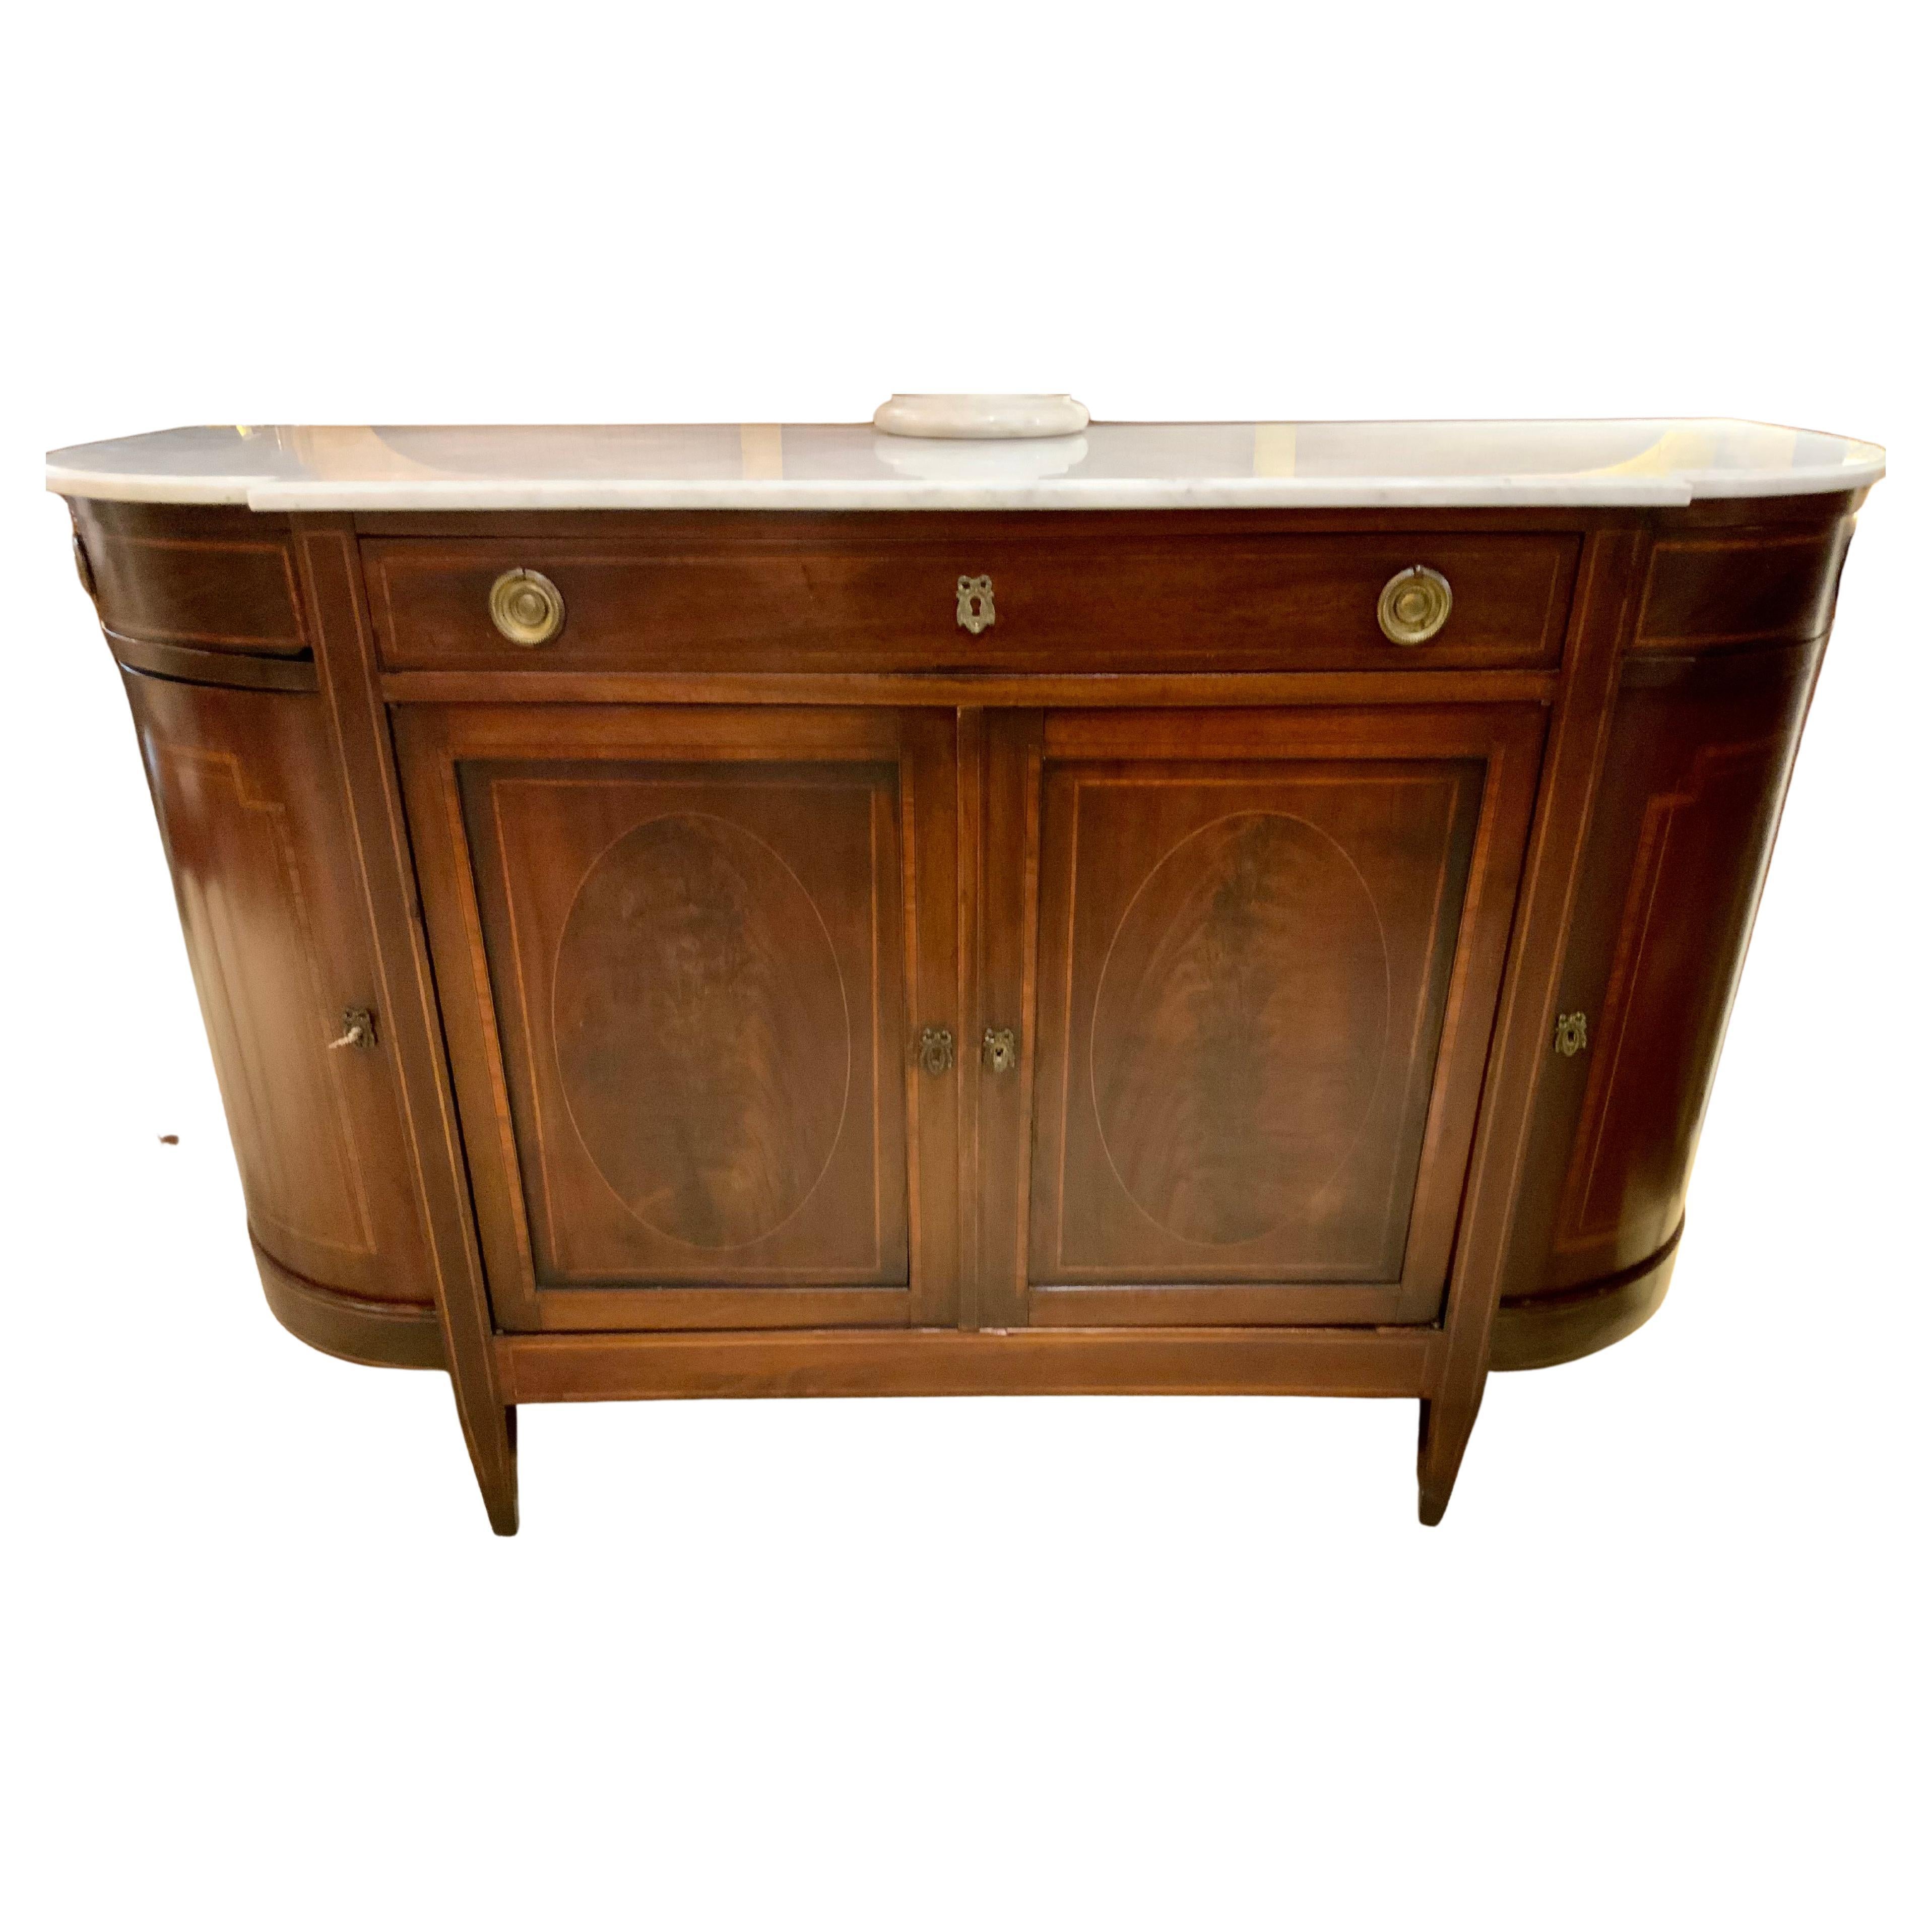 Louis XVI, Style Mahogany Buffet with White Marble Top, Demilune